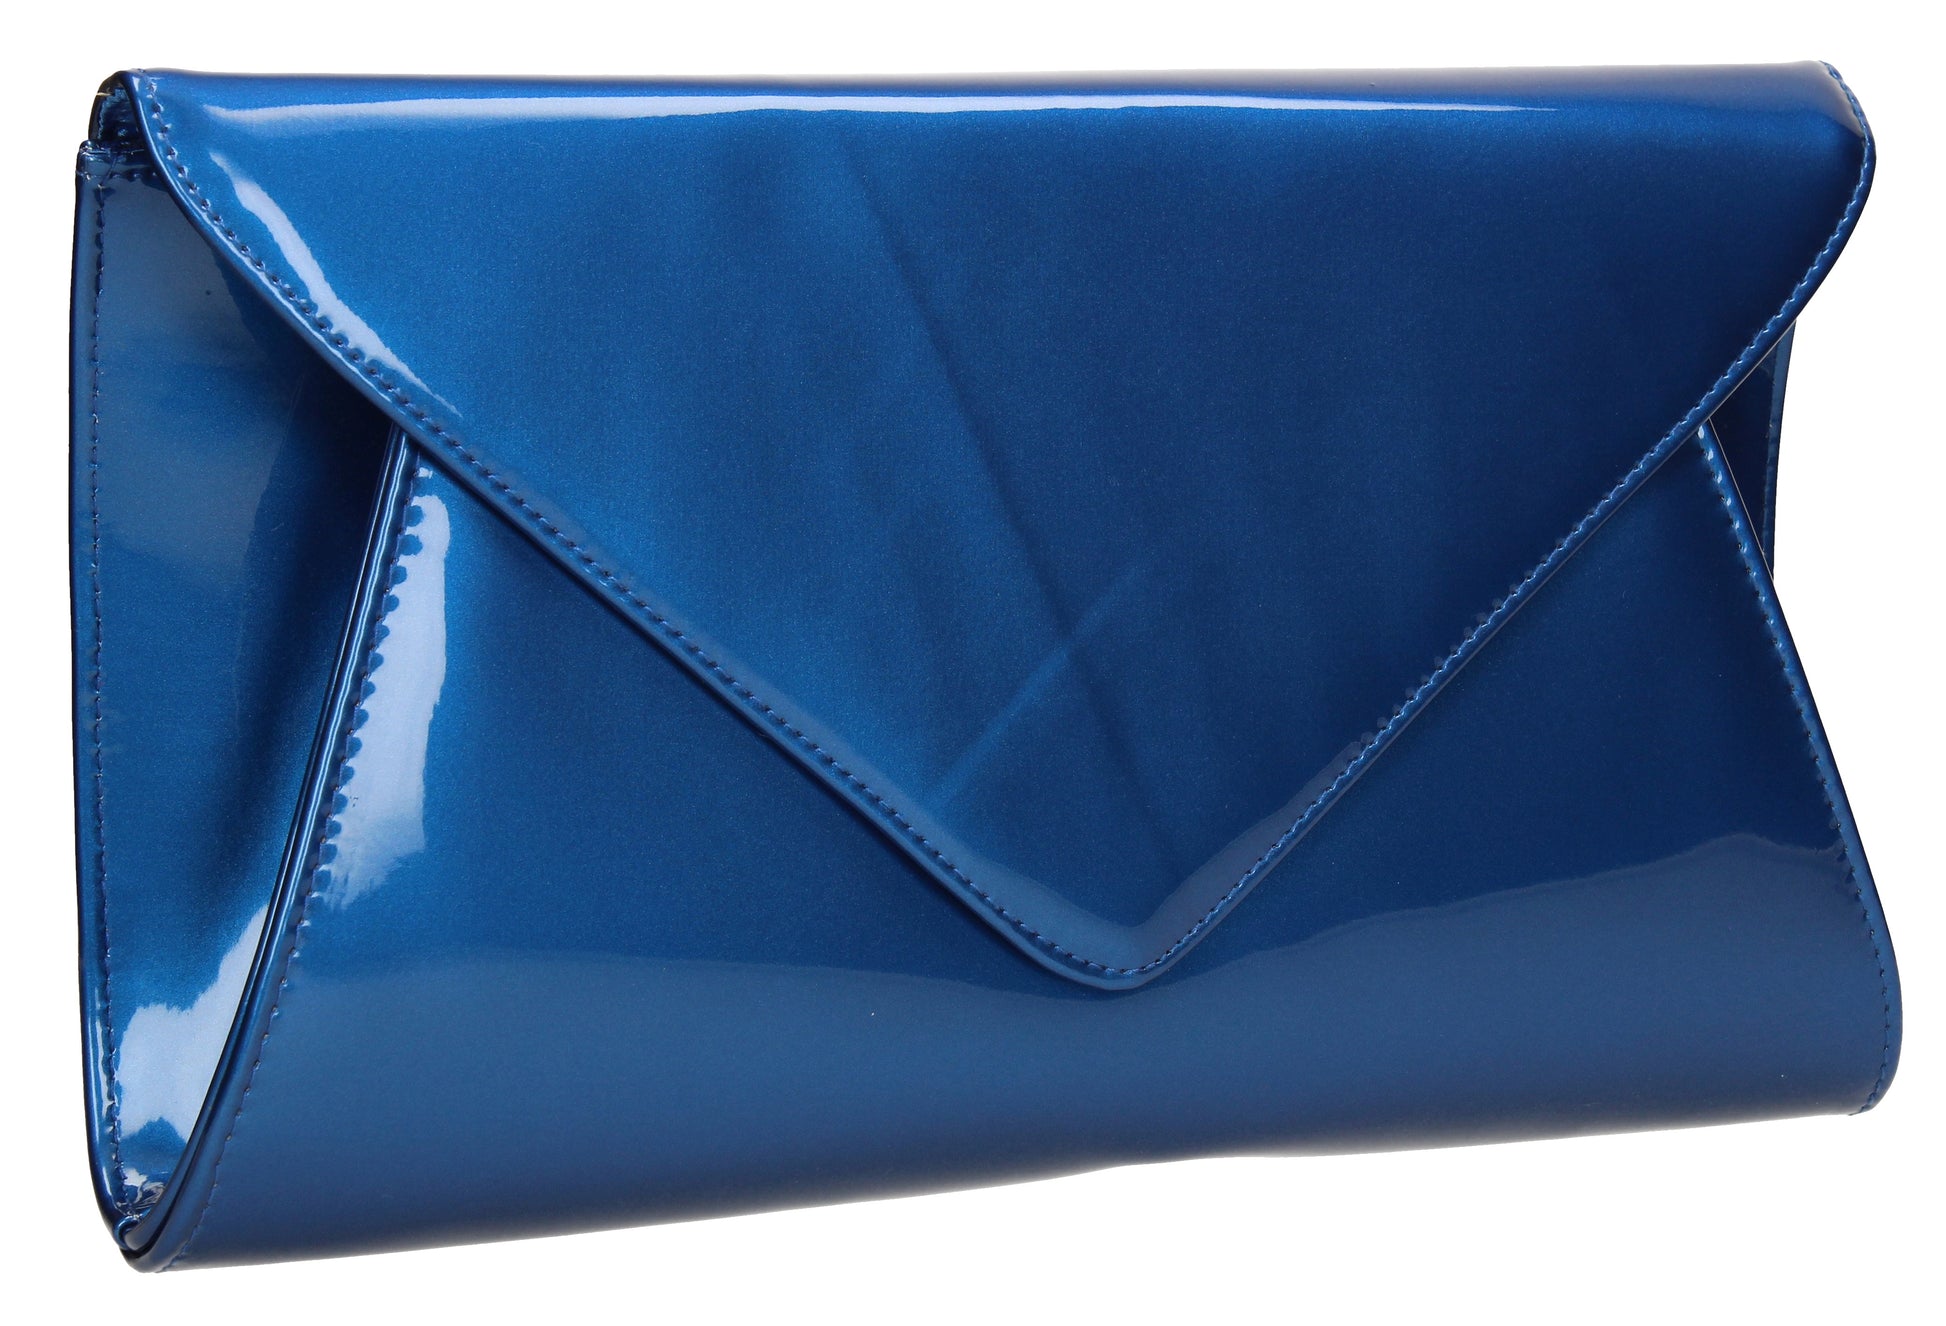 SWANKYSWANS Juliet Patent Envelope Clutch Bag Shimmer Blue Cute Cheap Clutch Bag For Weddings School and Work